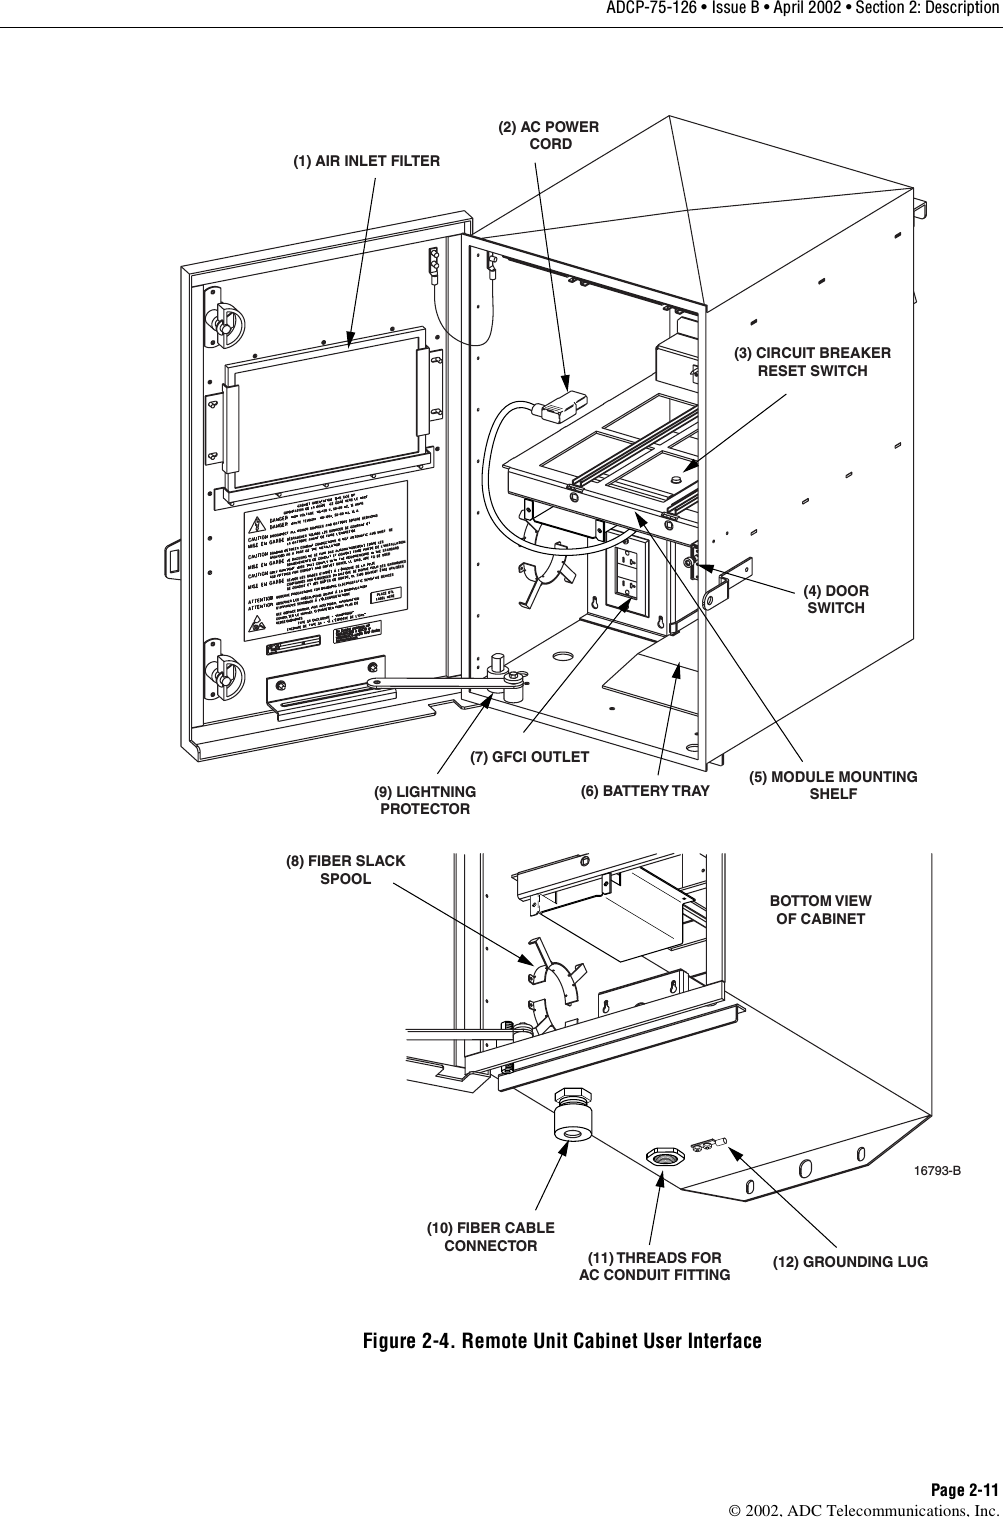 ADCP-75-126 • Issue B • April 2002 • Section 2: DescriptionPage 2-11©2002, ADC Telecommunications, Inc.Figure 2-4. Remote Unit Cabinet User InterfaceBOTTOM VIEWOF CABINET(7) GFCI OUTLET(4) DOORSWITCH(1) AIR INLET FILTER(2) AC POWER CORD(3) CIRCUIT BREAKERRESET SWITCH(5) MODULE MOUNTINGSHELF(6) BATTERY TRAY(8) FIBER SLACKSPOOL(9) LIGHTNINGPROTECTOR(10) FIBER CABLECONNECTOR (11) THREADS FORAC CONDUIT FITTING (12) GROUNDING LUG16793-B